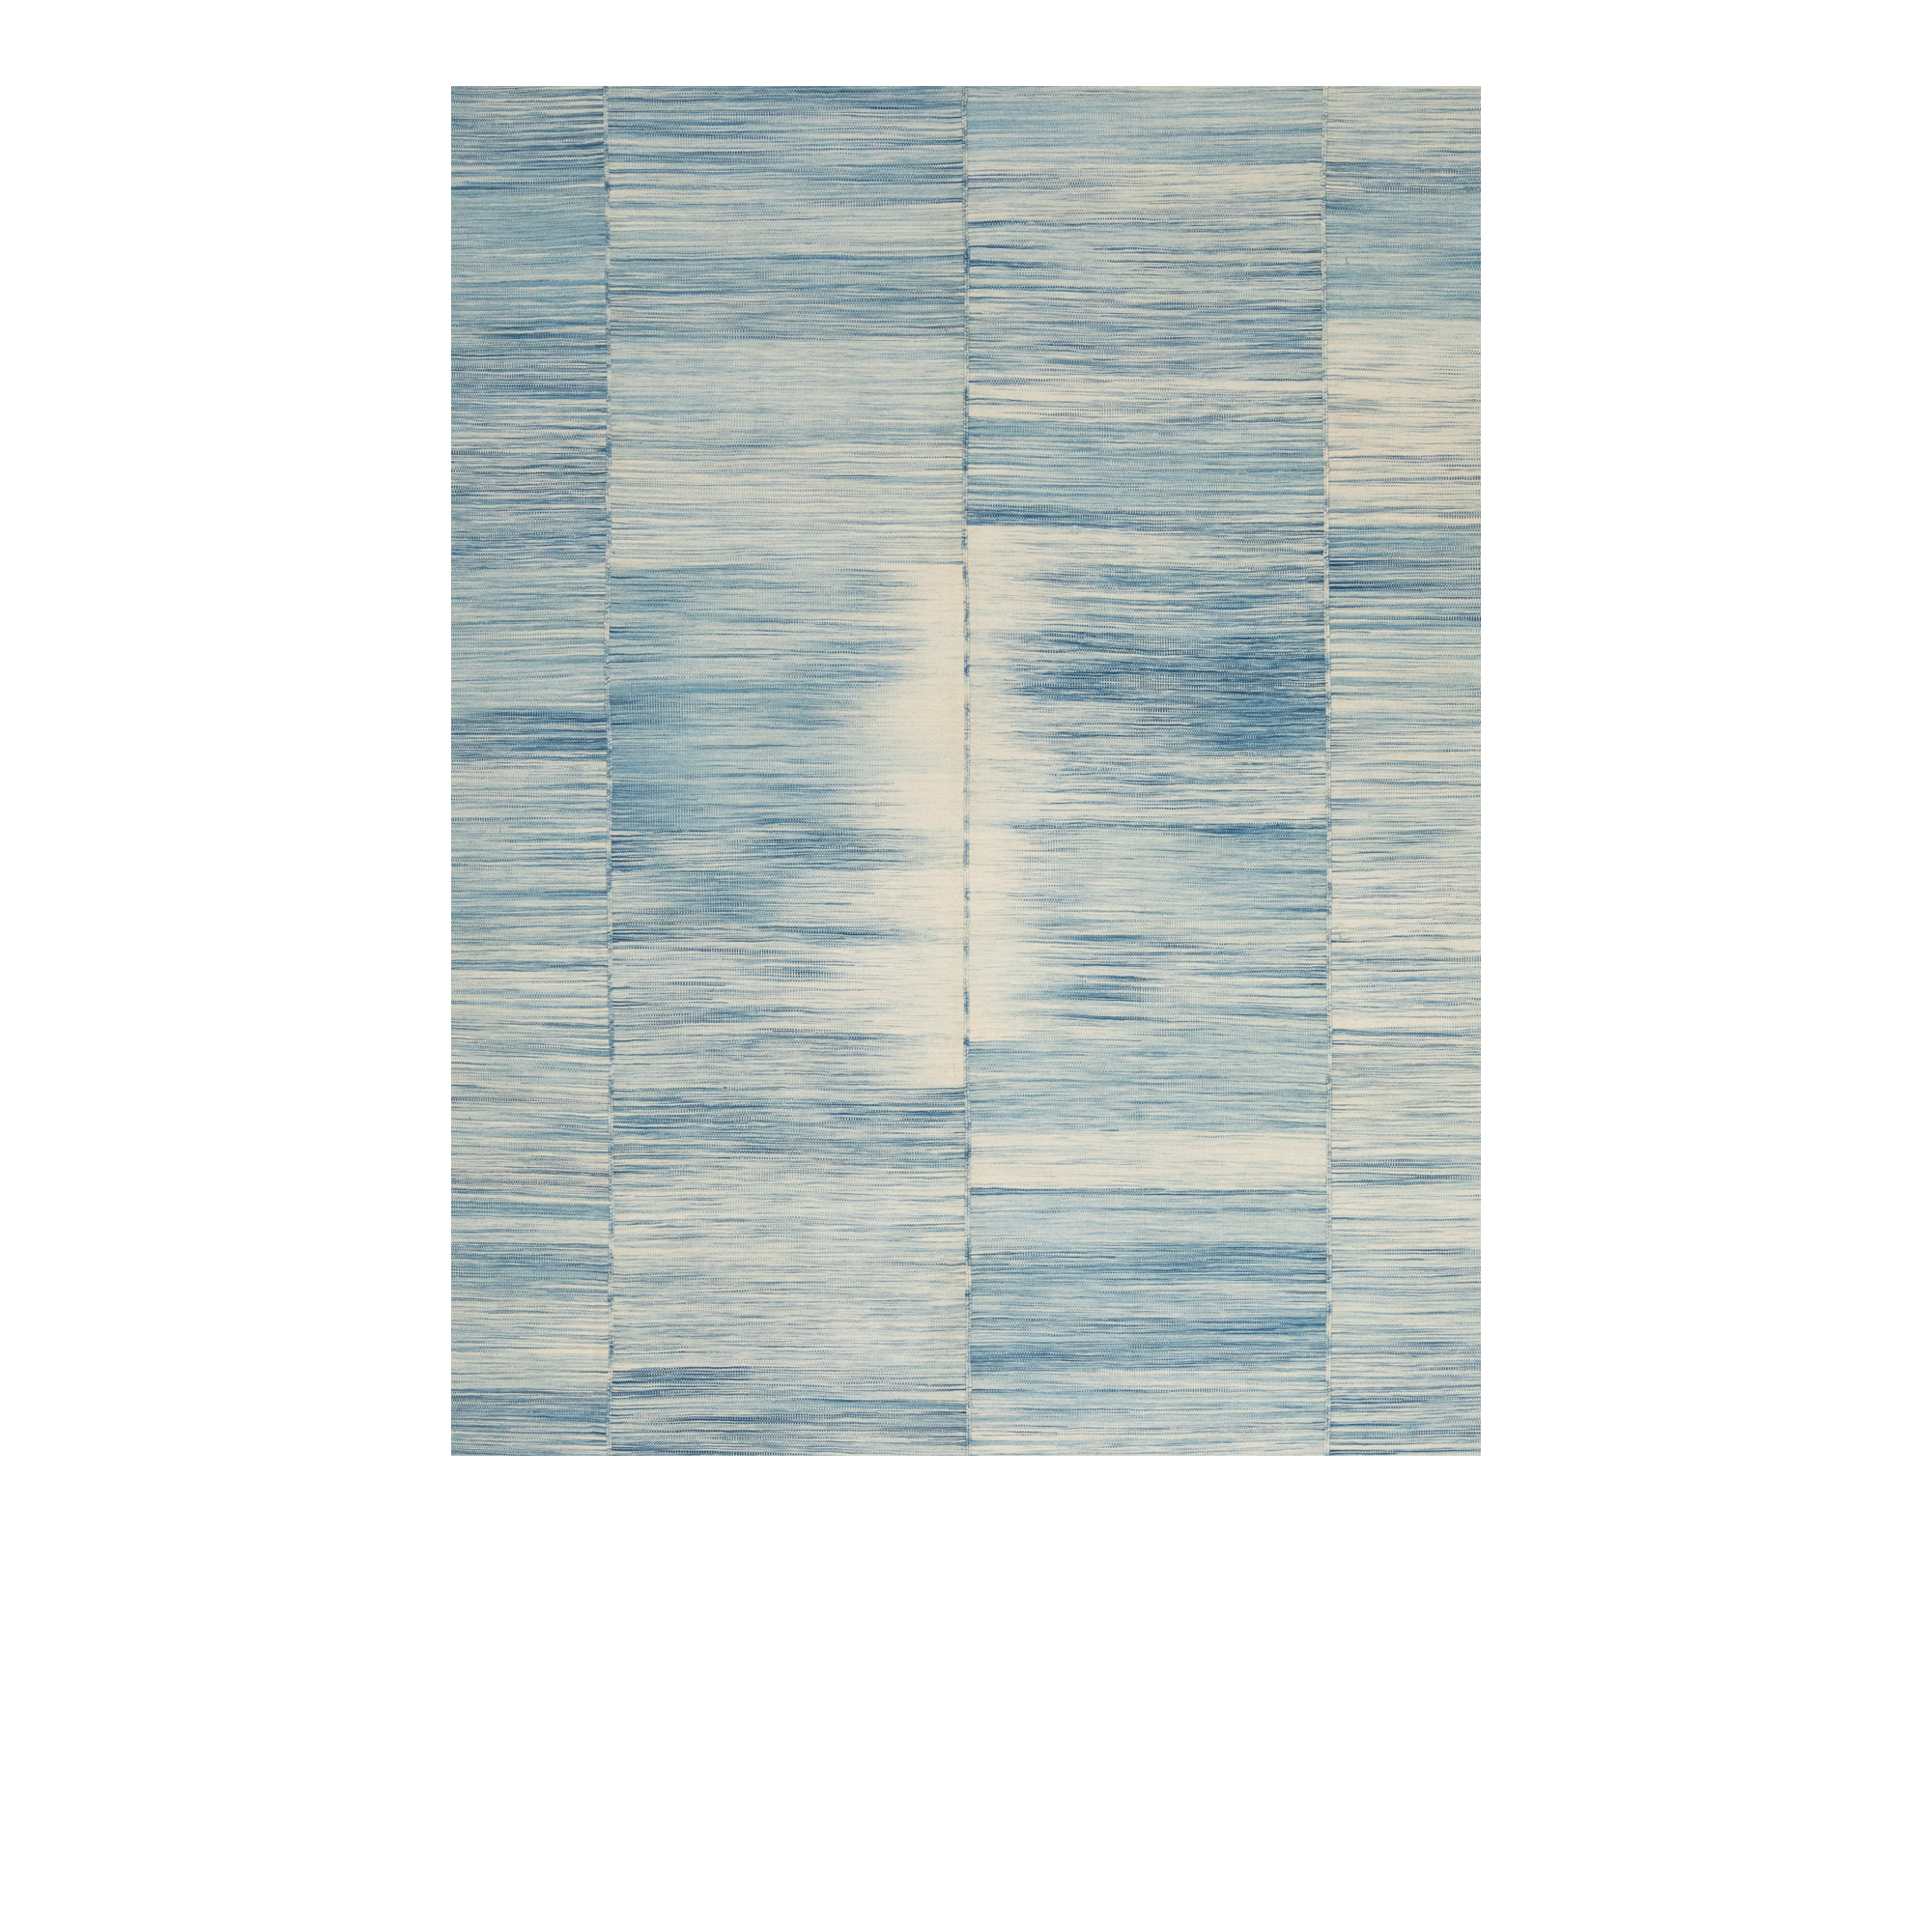 This Mazandaran rug is is hand-woven and 100% made of wool.